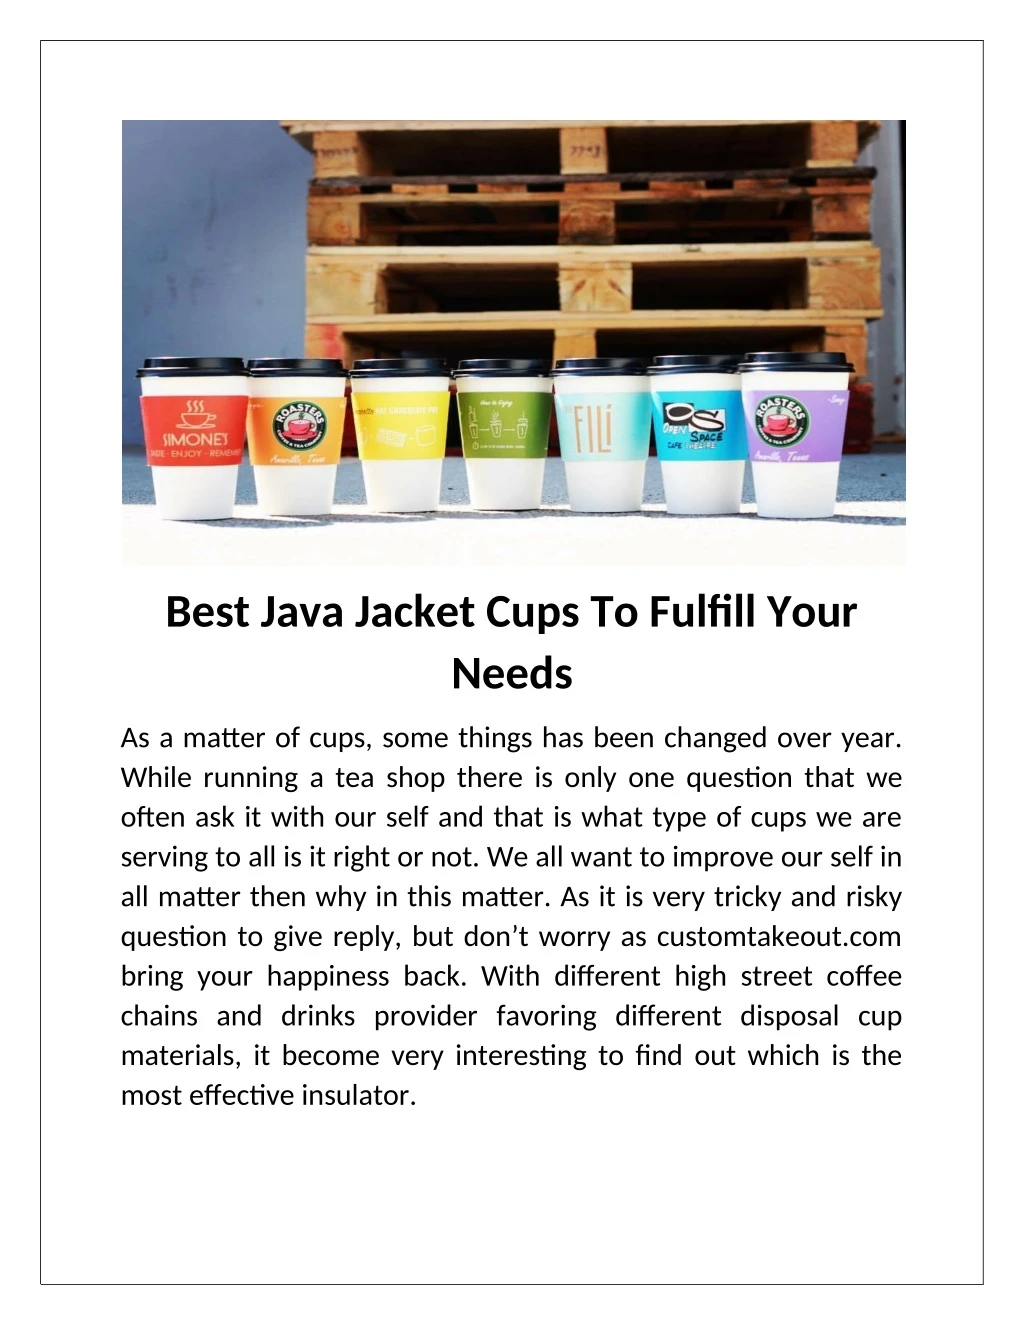 best java jacket cups to fulfill your needs